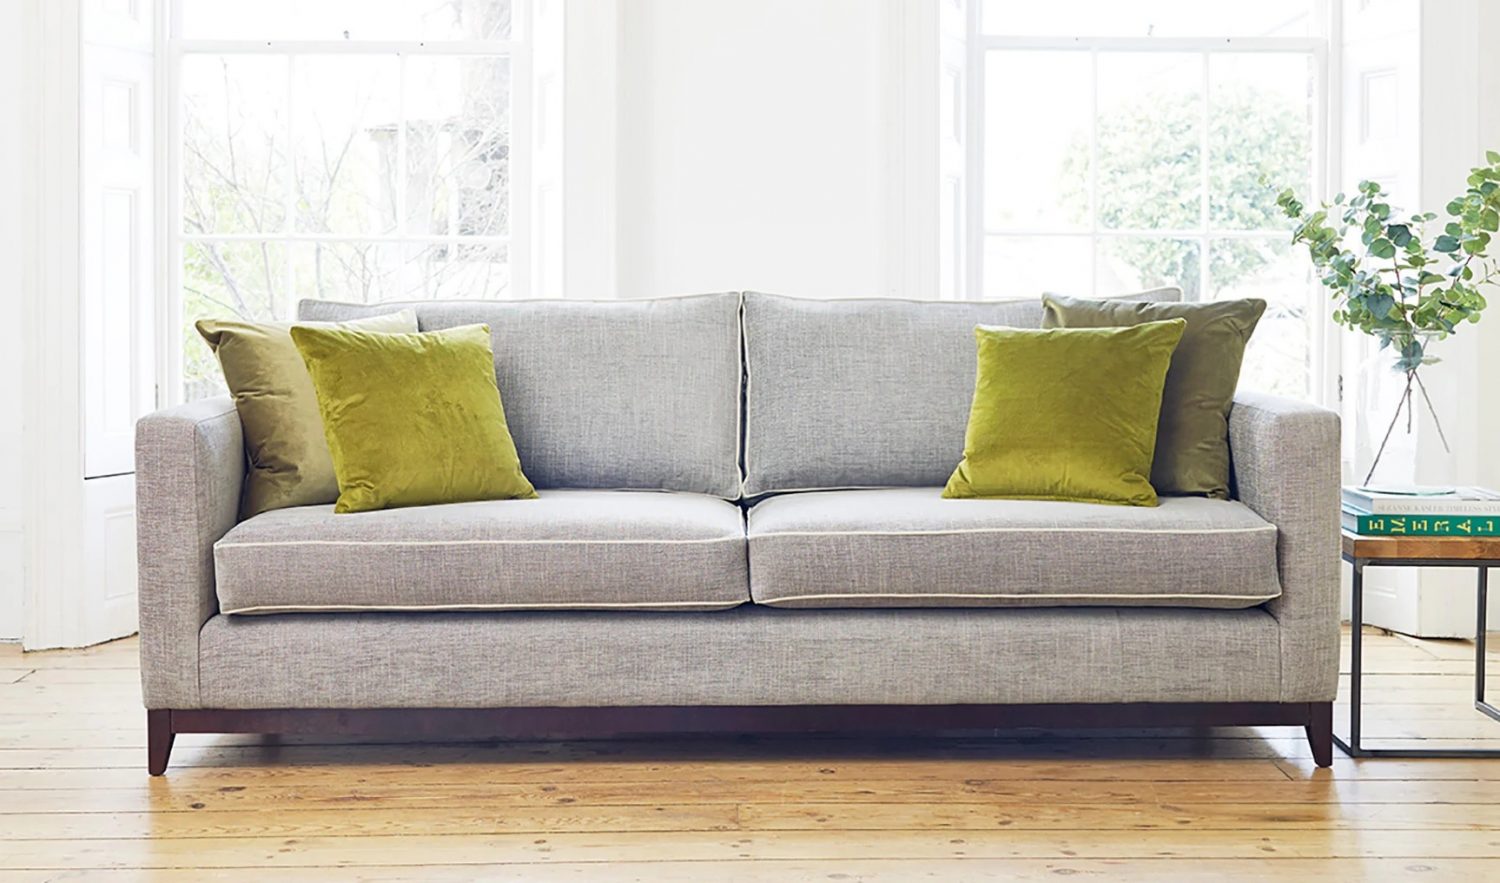 The Best Stores to Shop for Affordable Furniture in UK